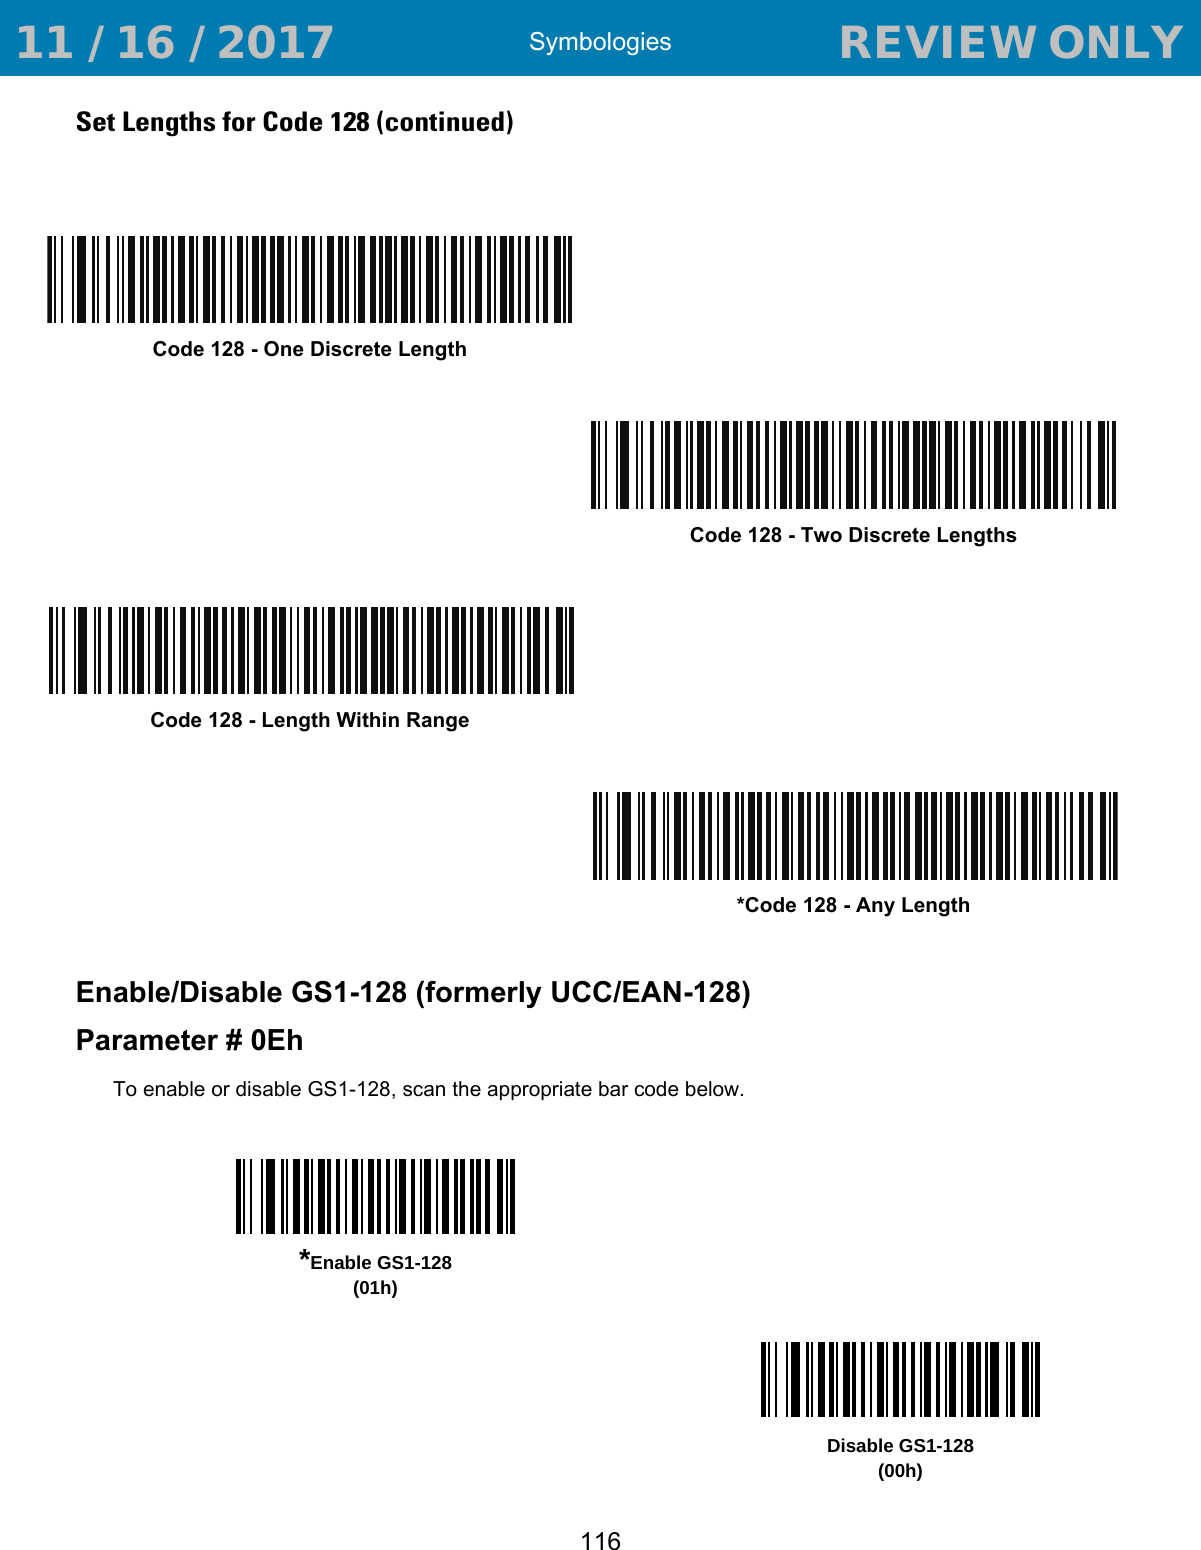 Symbologies116Set Lengths for Code 128 (continued)Enable/Disable GS1-128 (formerly UCC/EAN-128)Parameter # 0EhTo enable or disable GS1-128, scan the appropriate bar code below. Code 128 - One Discrete LengthCode 128 - Two Discrete LengthsCode 128 - Length Within Range*Code 128 - Any Length*Enable GS1-128(01h)Disable GS1-128(00h) 11 / 16 / 2017                                  REVIEW ONLY                             REVIEW ONLY - REVIEW ONLY - REVIEW ONLY